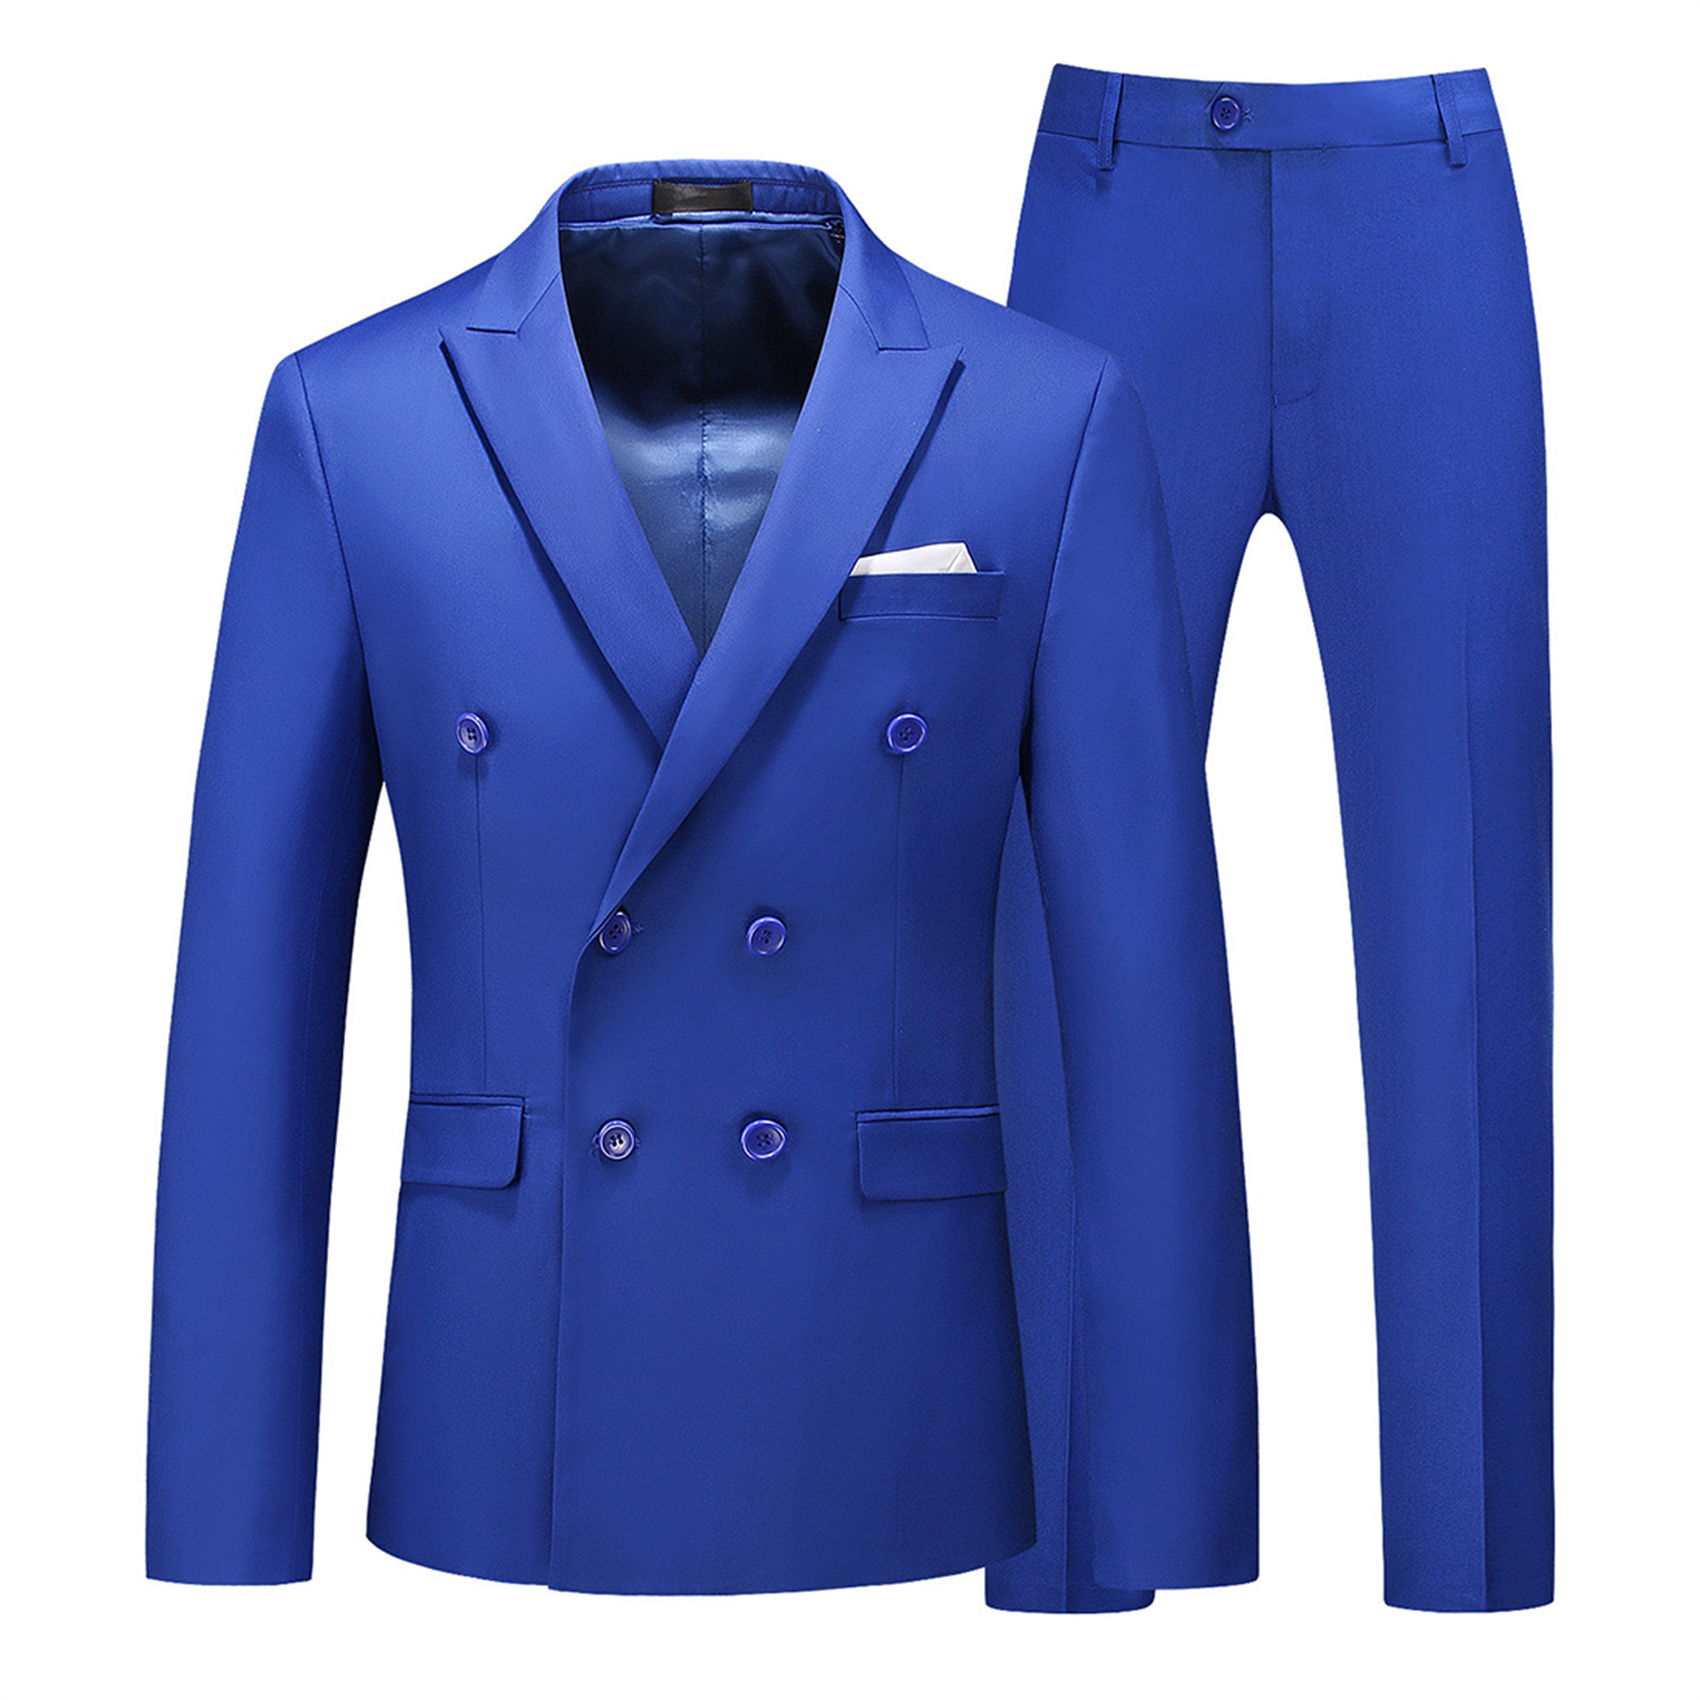 2 Piece Double Breasted Suit for Men, Slim Fit, Royal Blue